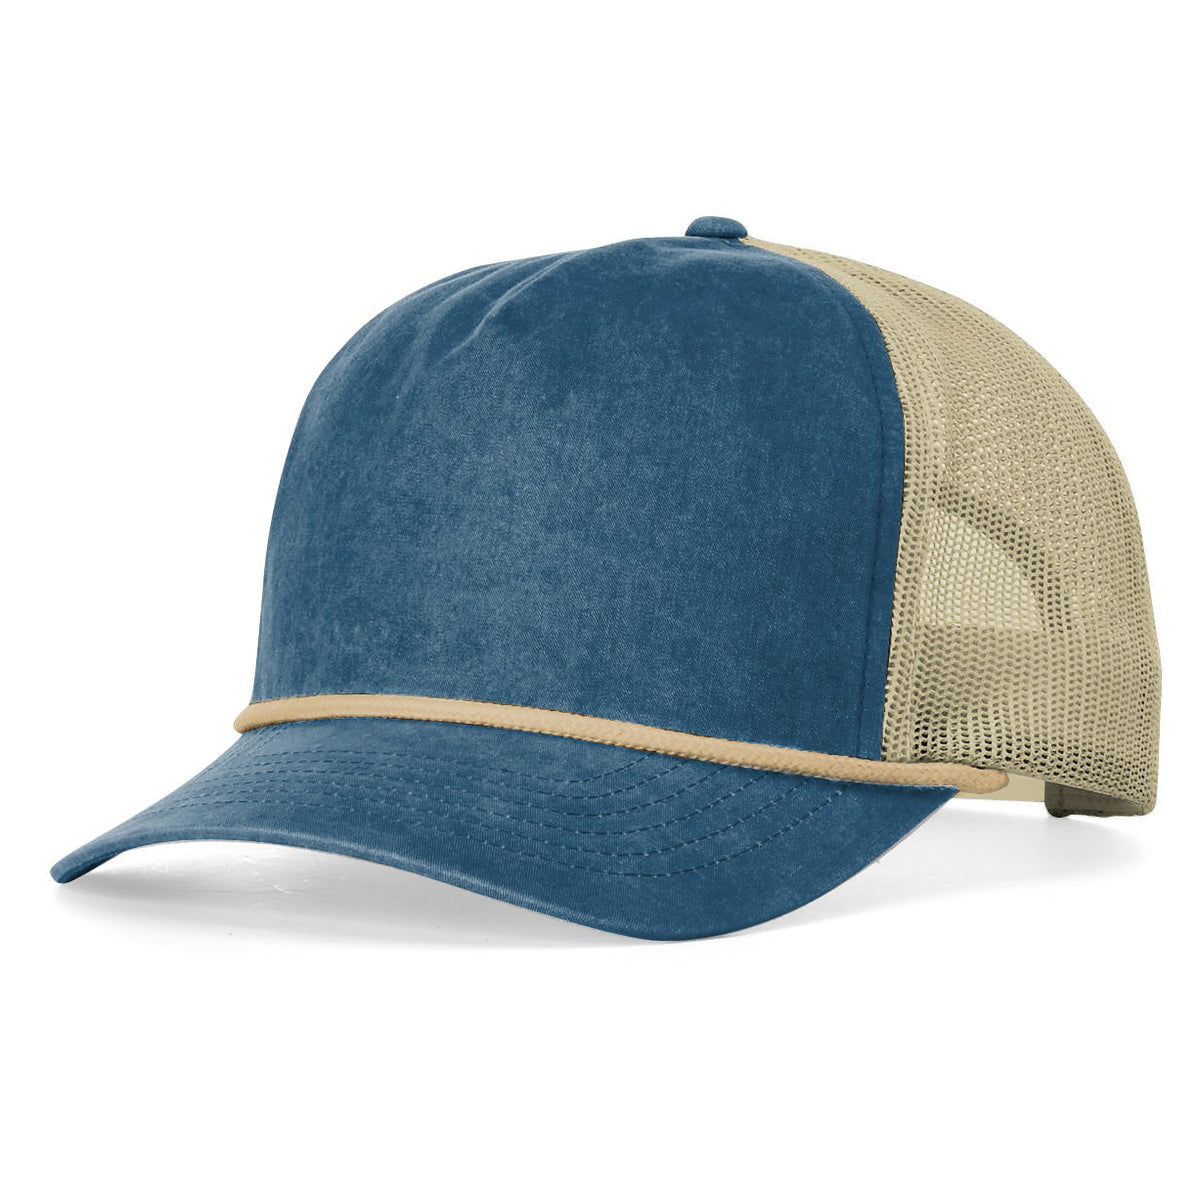 Debossed Leather Patch Hats - Holtz Leather